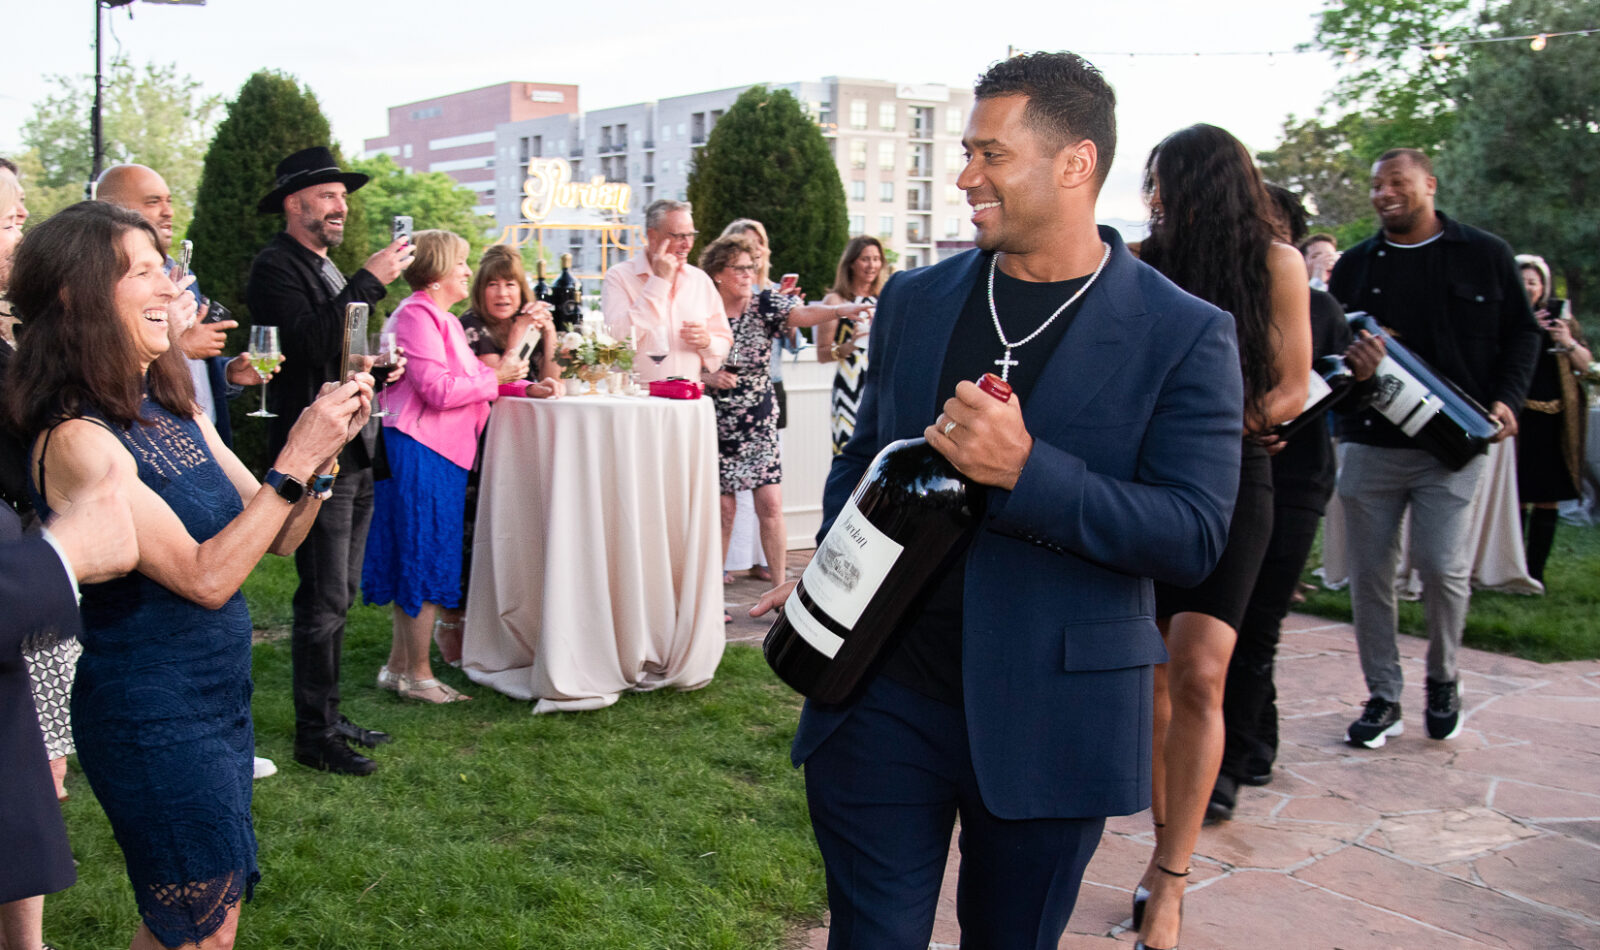 Russell Wilson celebrity walking through an outdoor party carrying a large bottle of wine with woman taking photos of him